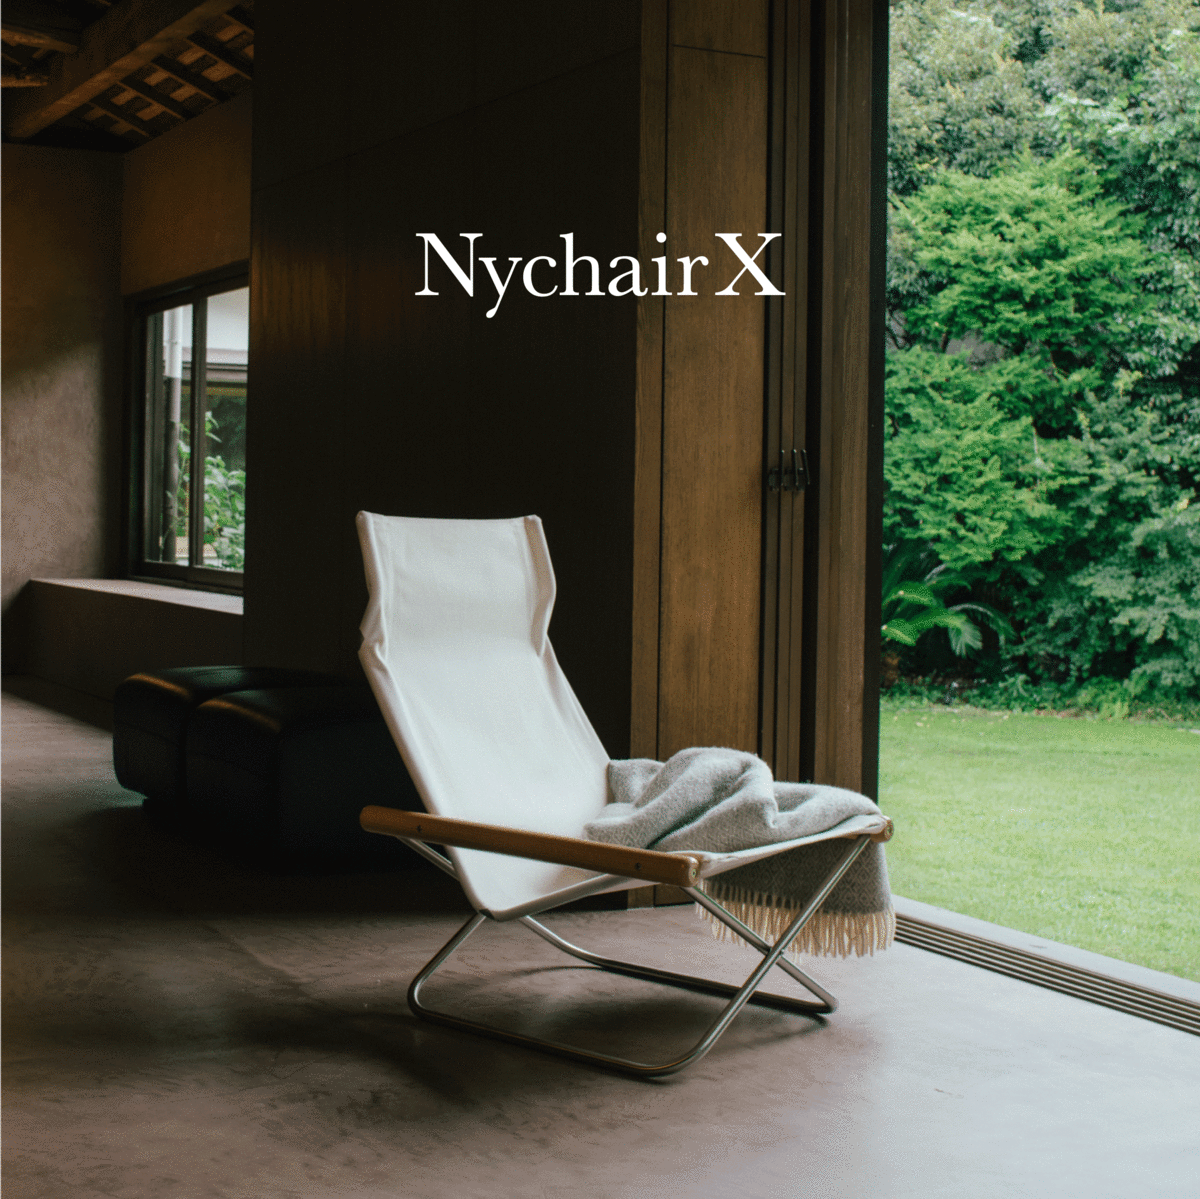 Nychair X